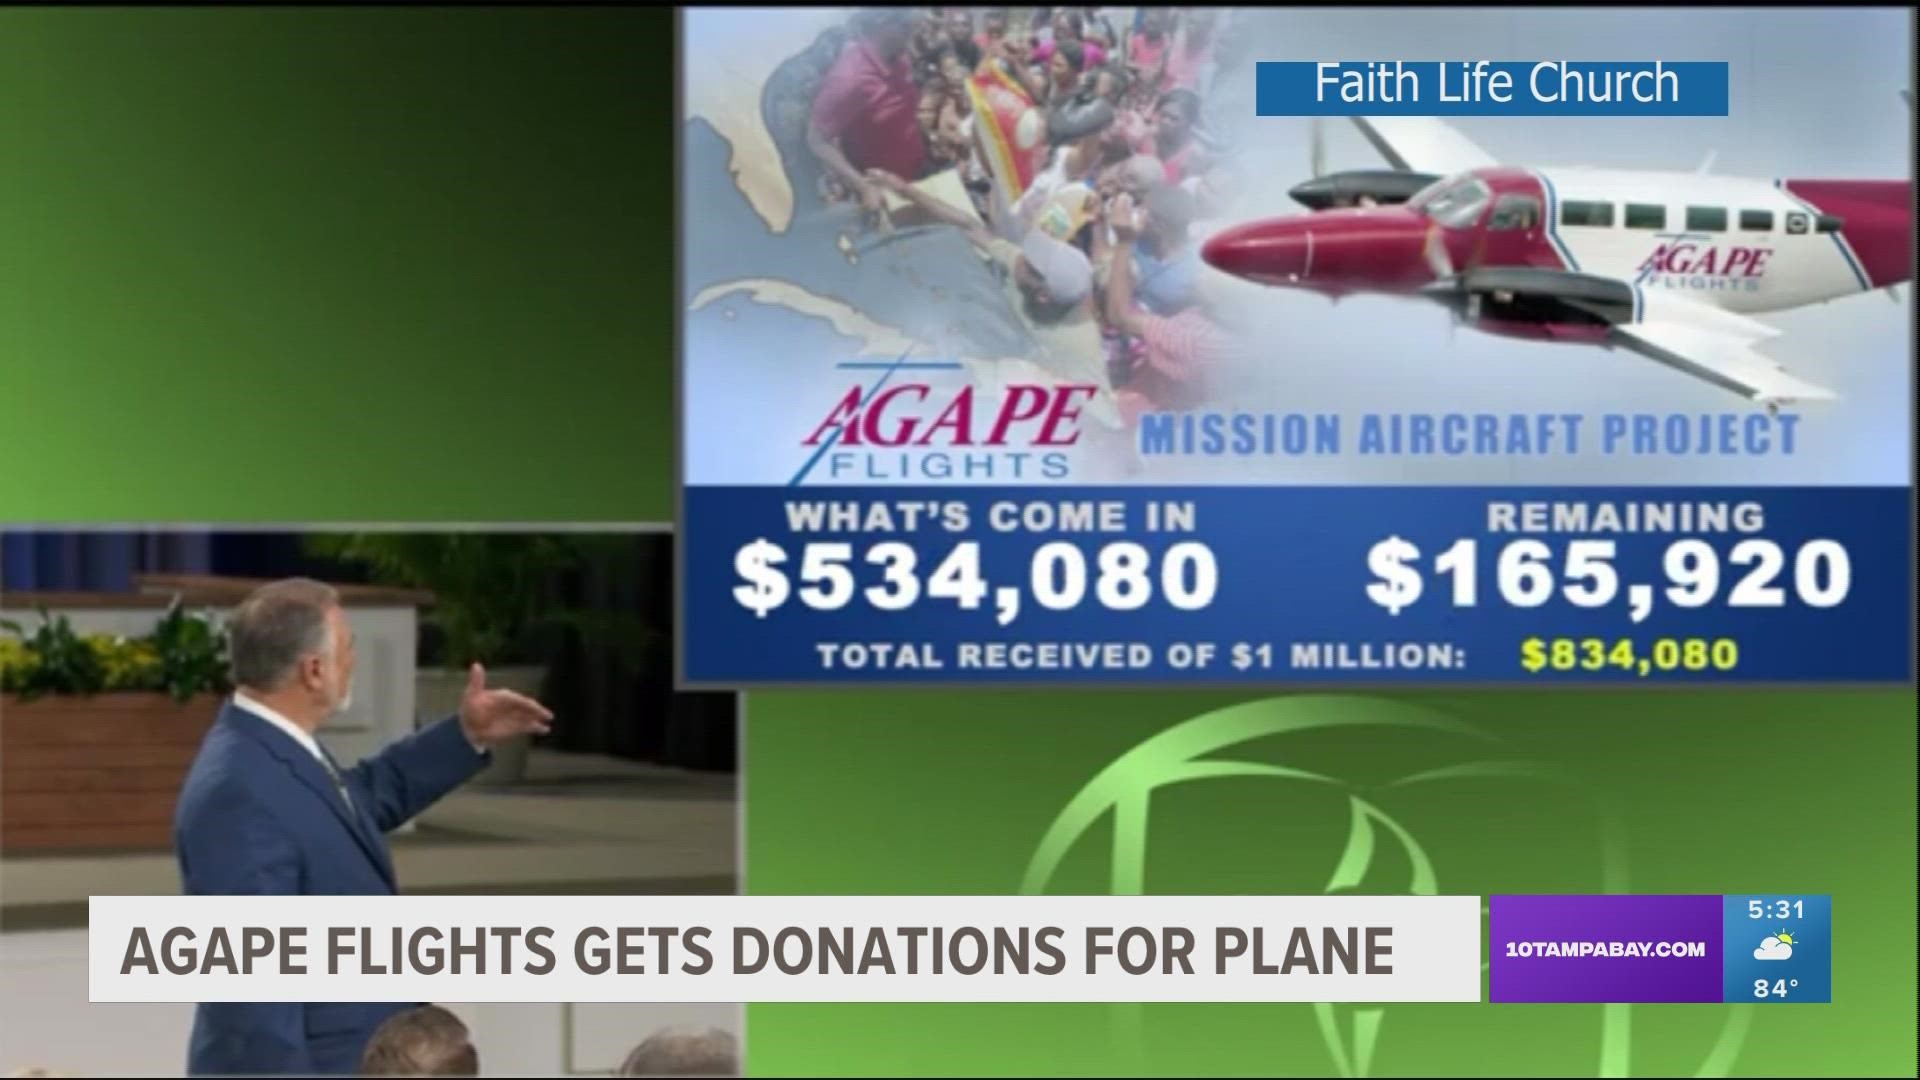 CEO Allen Speer said he was certain it was a 'God-sent' miracle when a pastor from Faith Life Church handed him three checks that totaled $1,000,000.